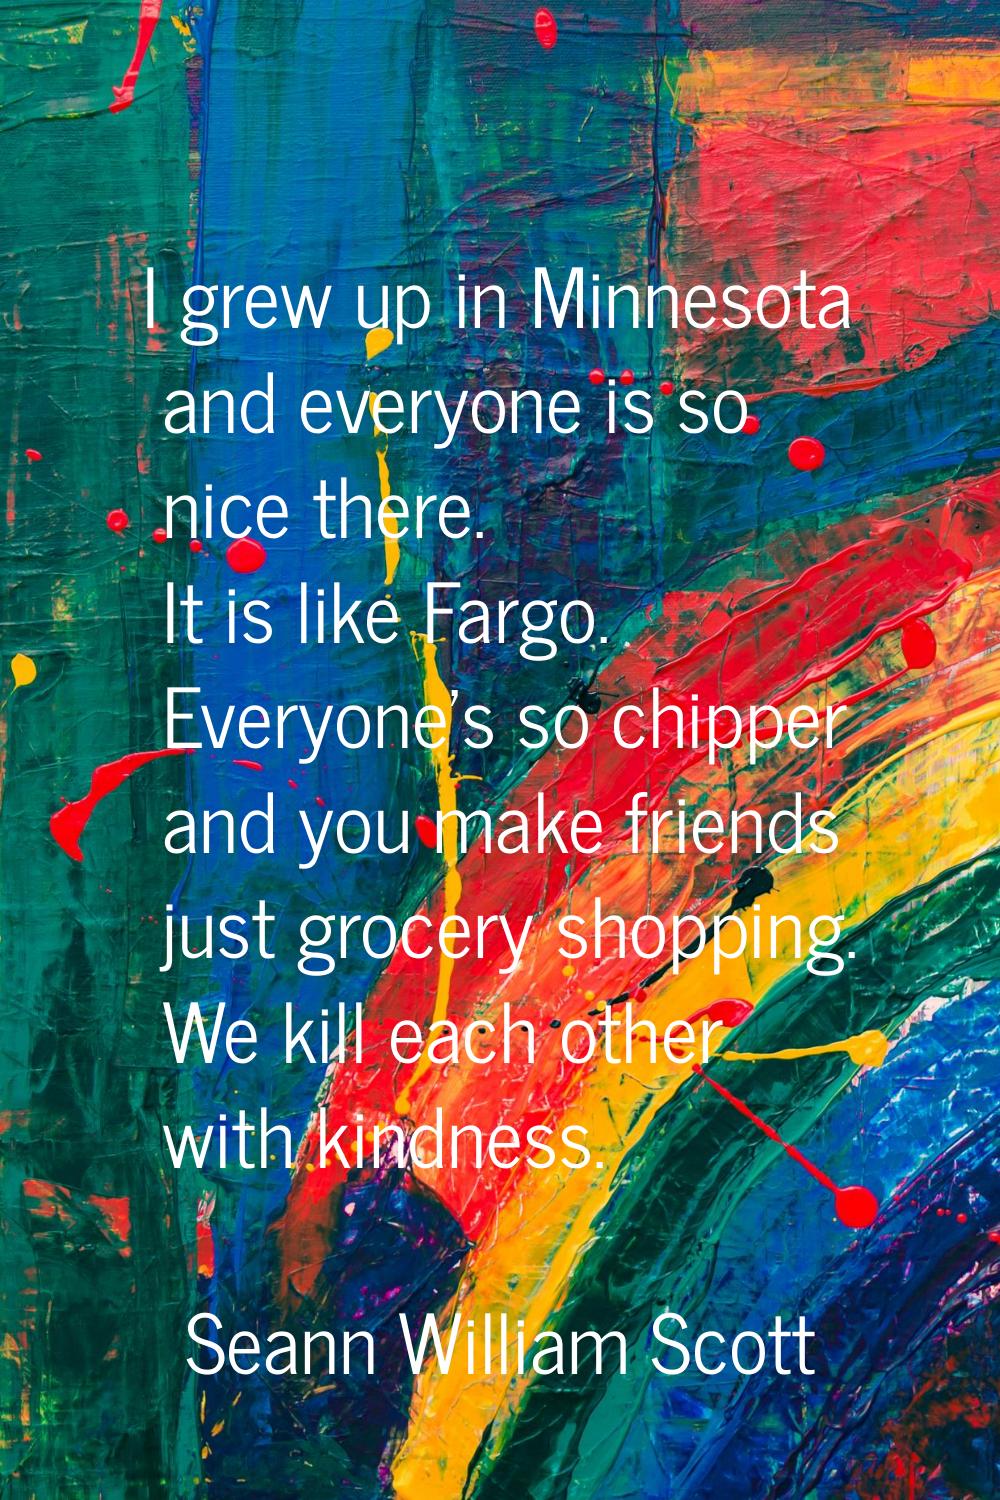 I grew up in Minnesota and everyone is so nice there. It is like Fargo. Everyone's so chipper and y